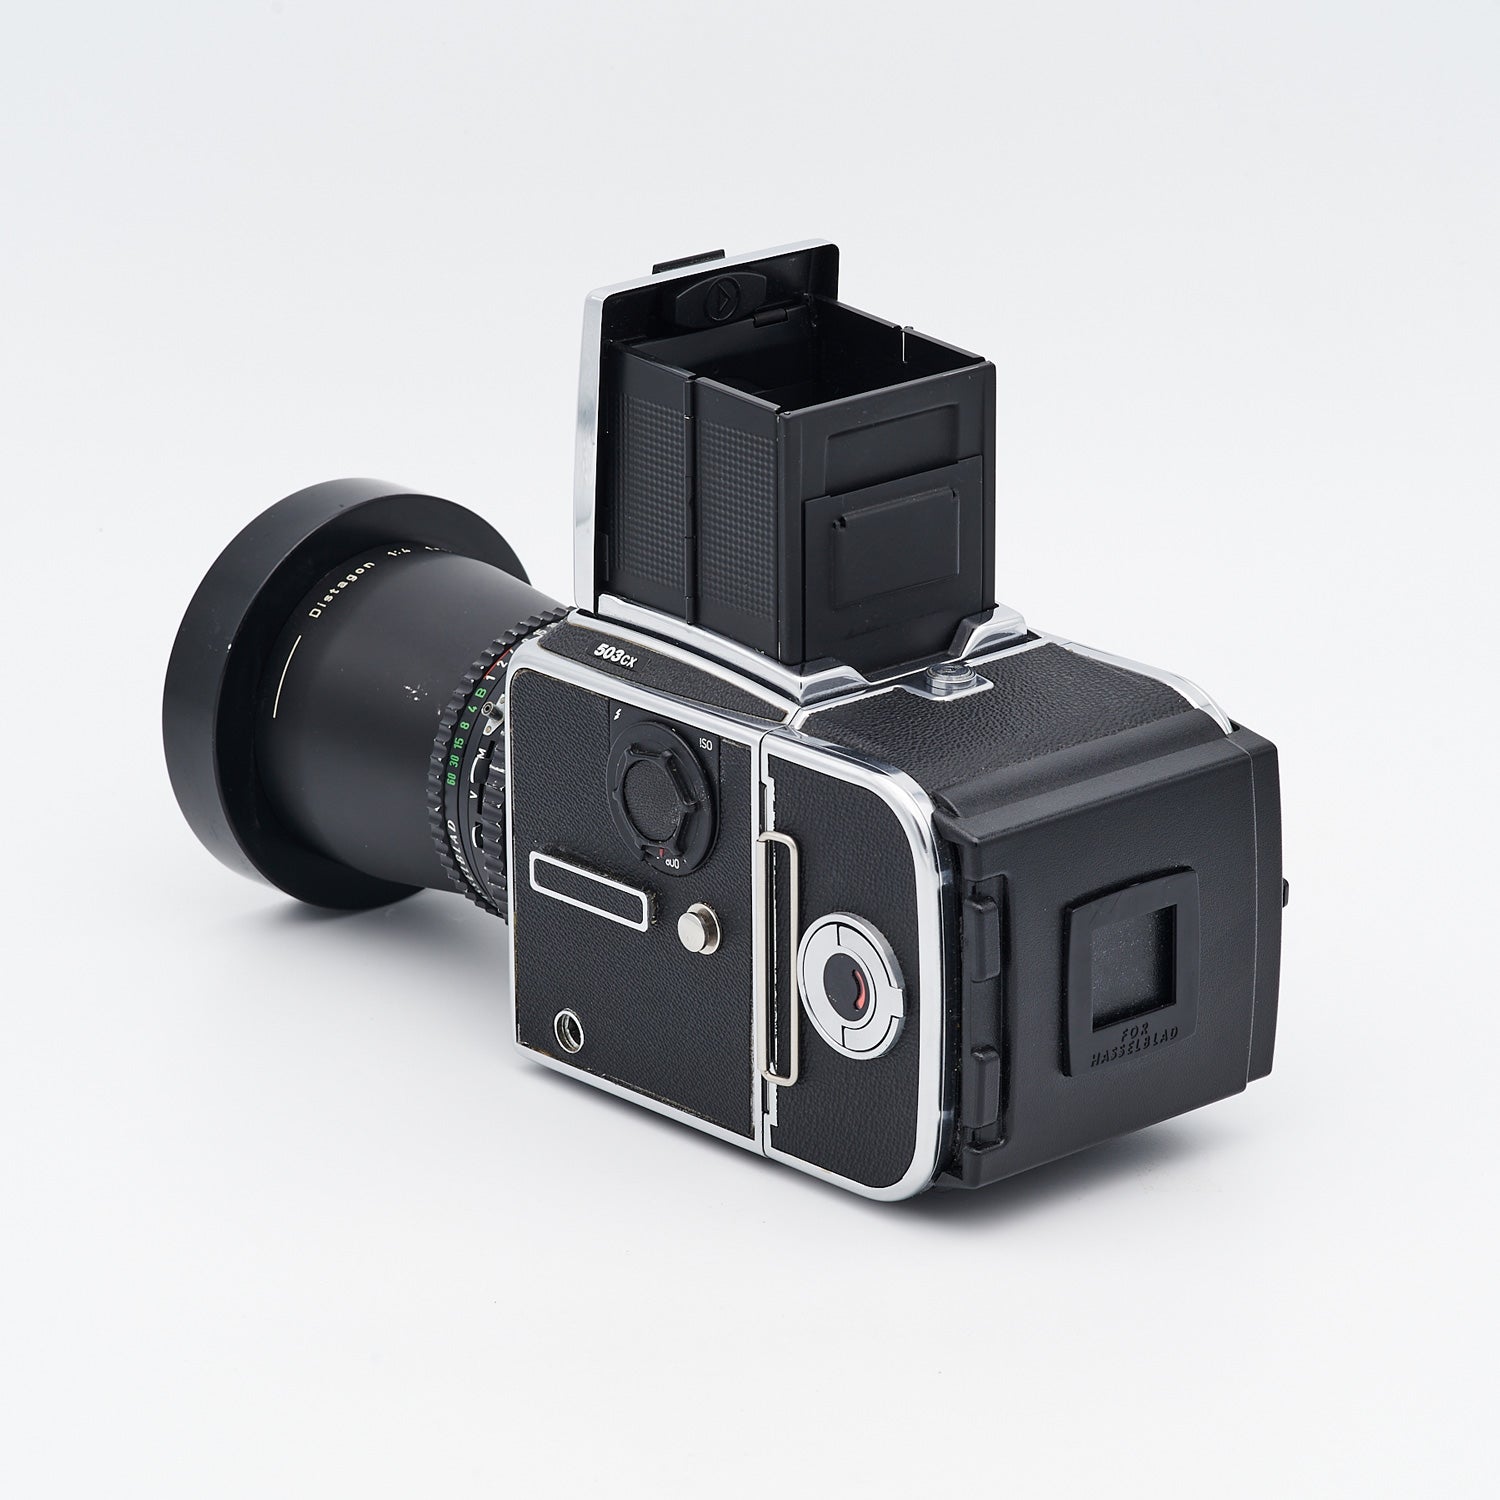 Hasselblad 503CX (S/N RR 1415771) Set inkl. Carl Zeiss Distagon 4/50mm T* (S/N 5775273) & Hasselblad A12 Magazin